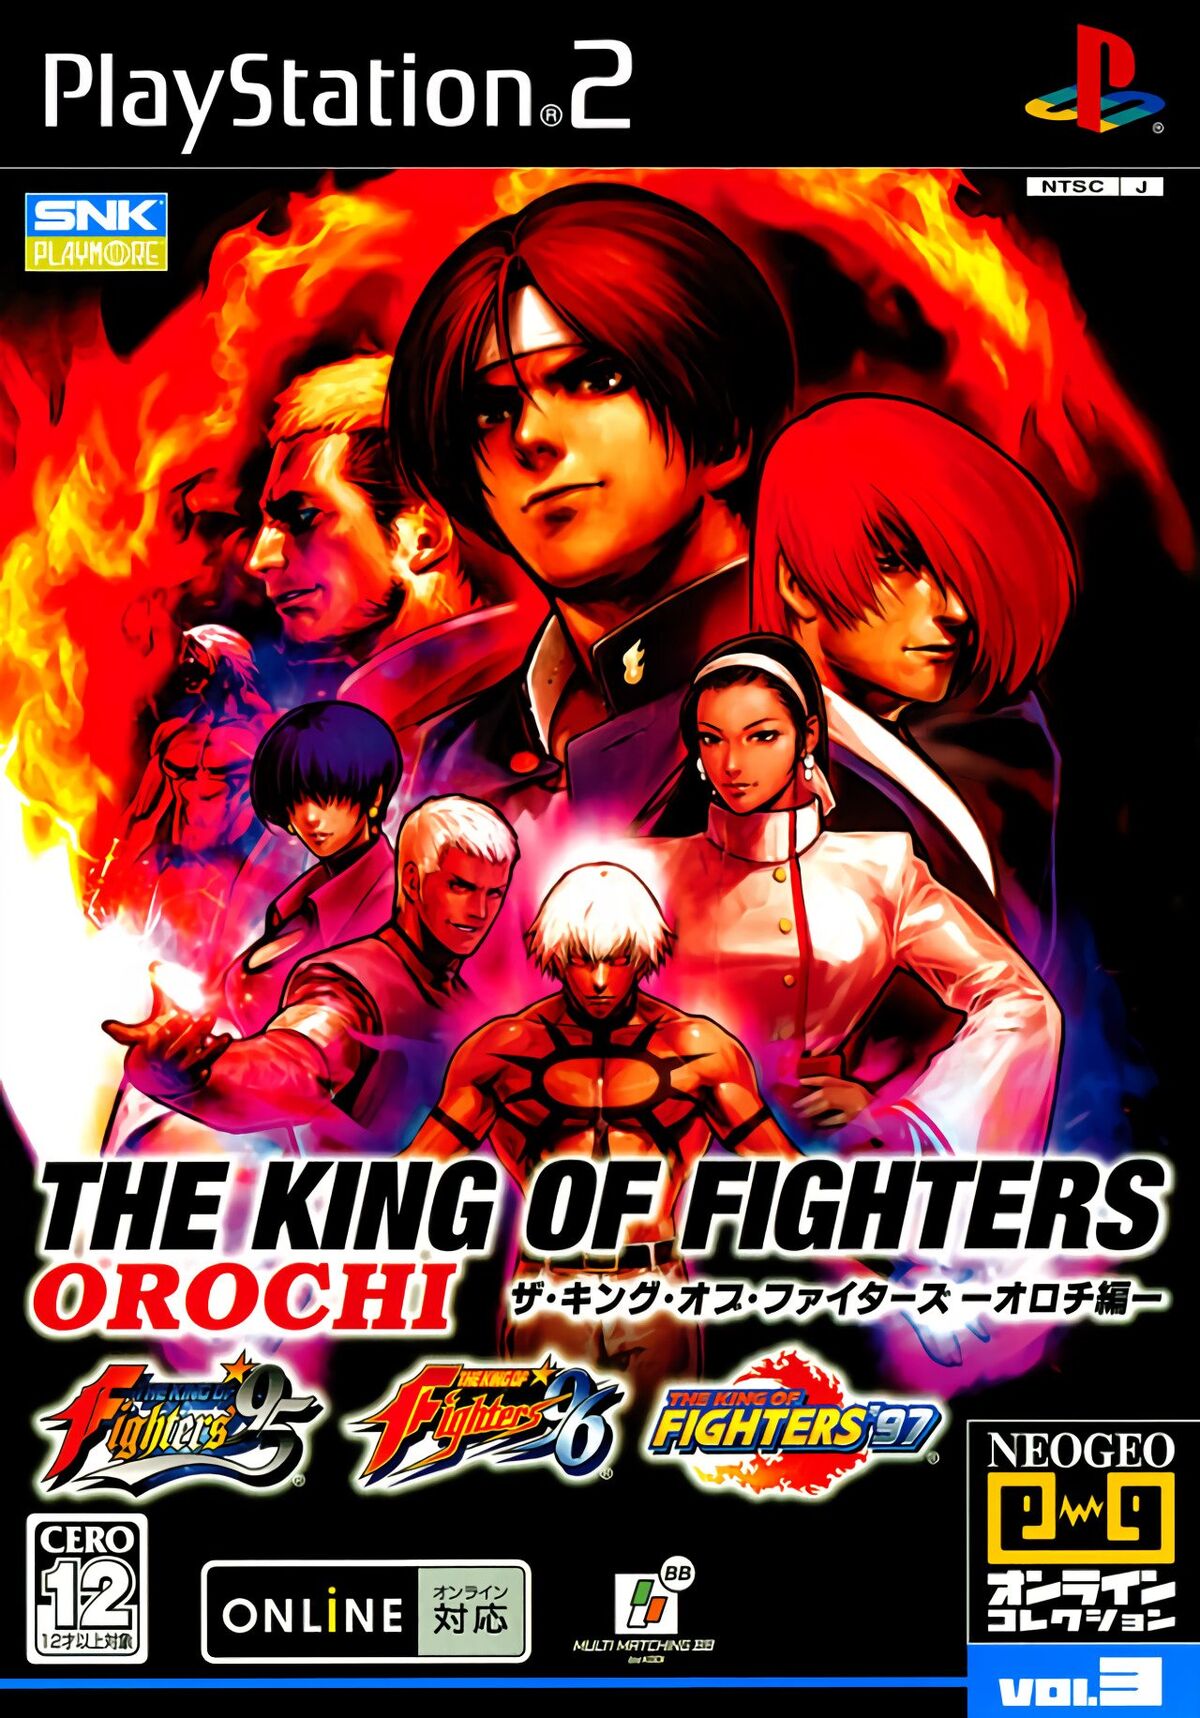 The King of Fighters Orochi Collection | SNK Wiki | Fandom